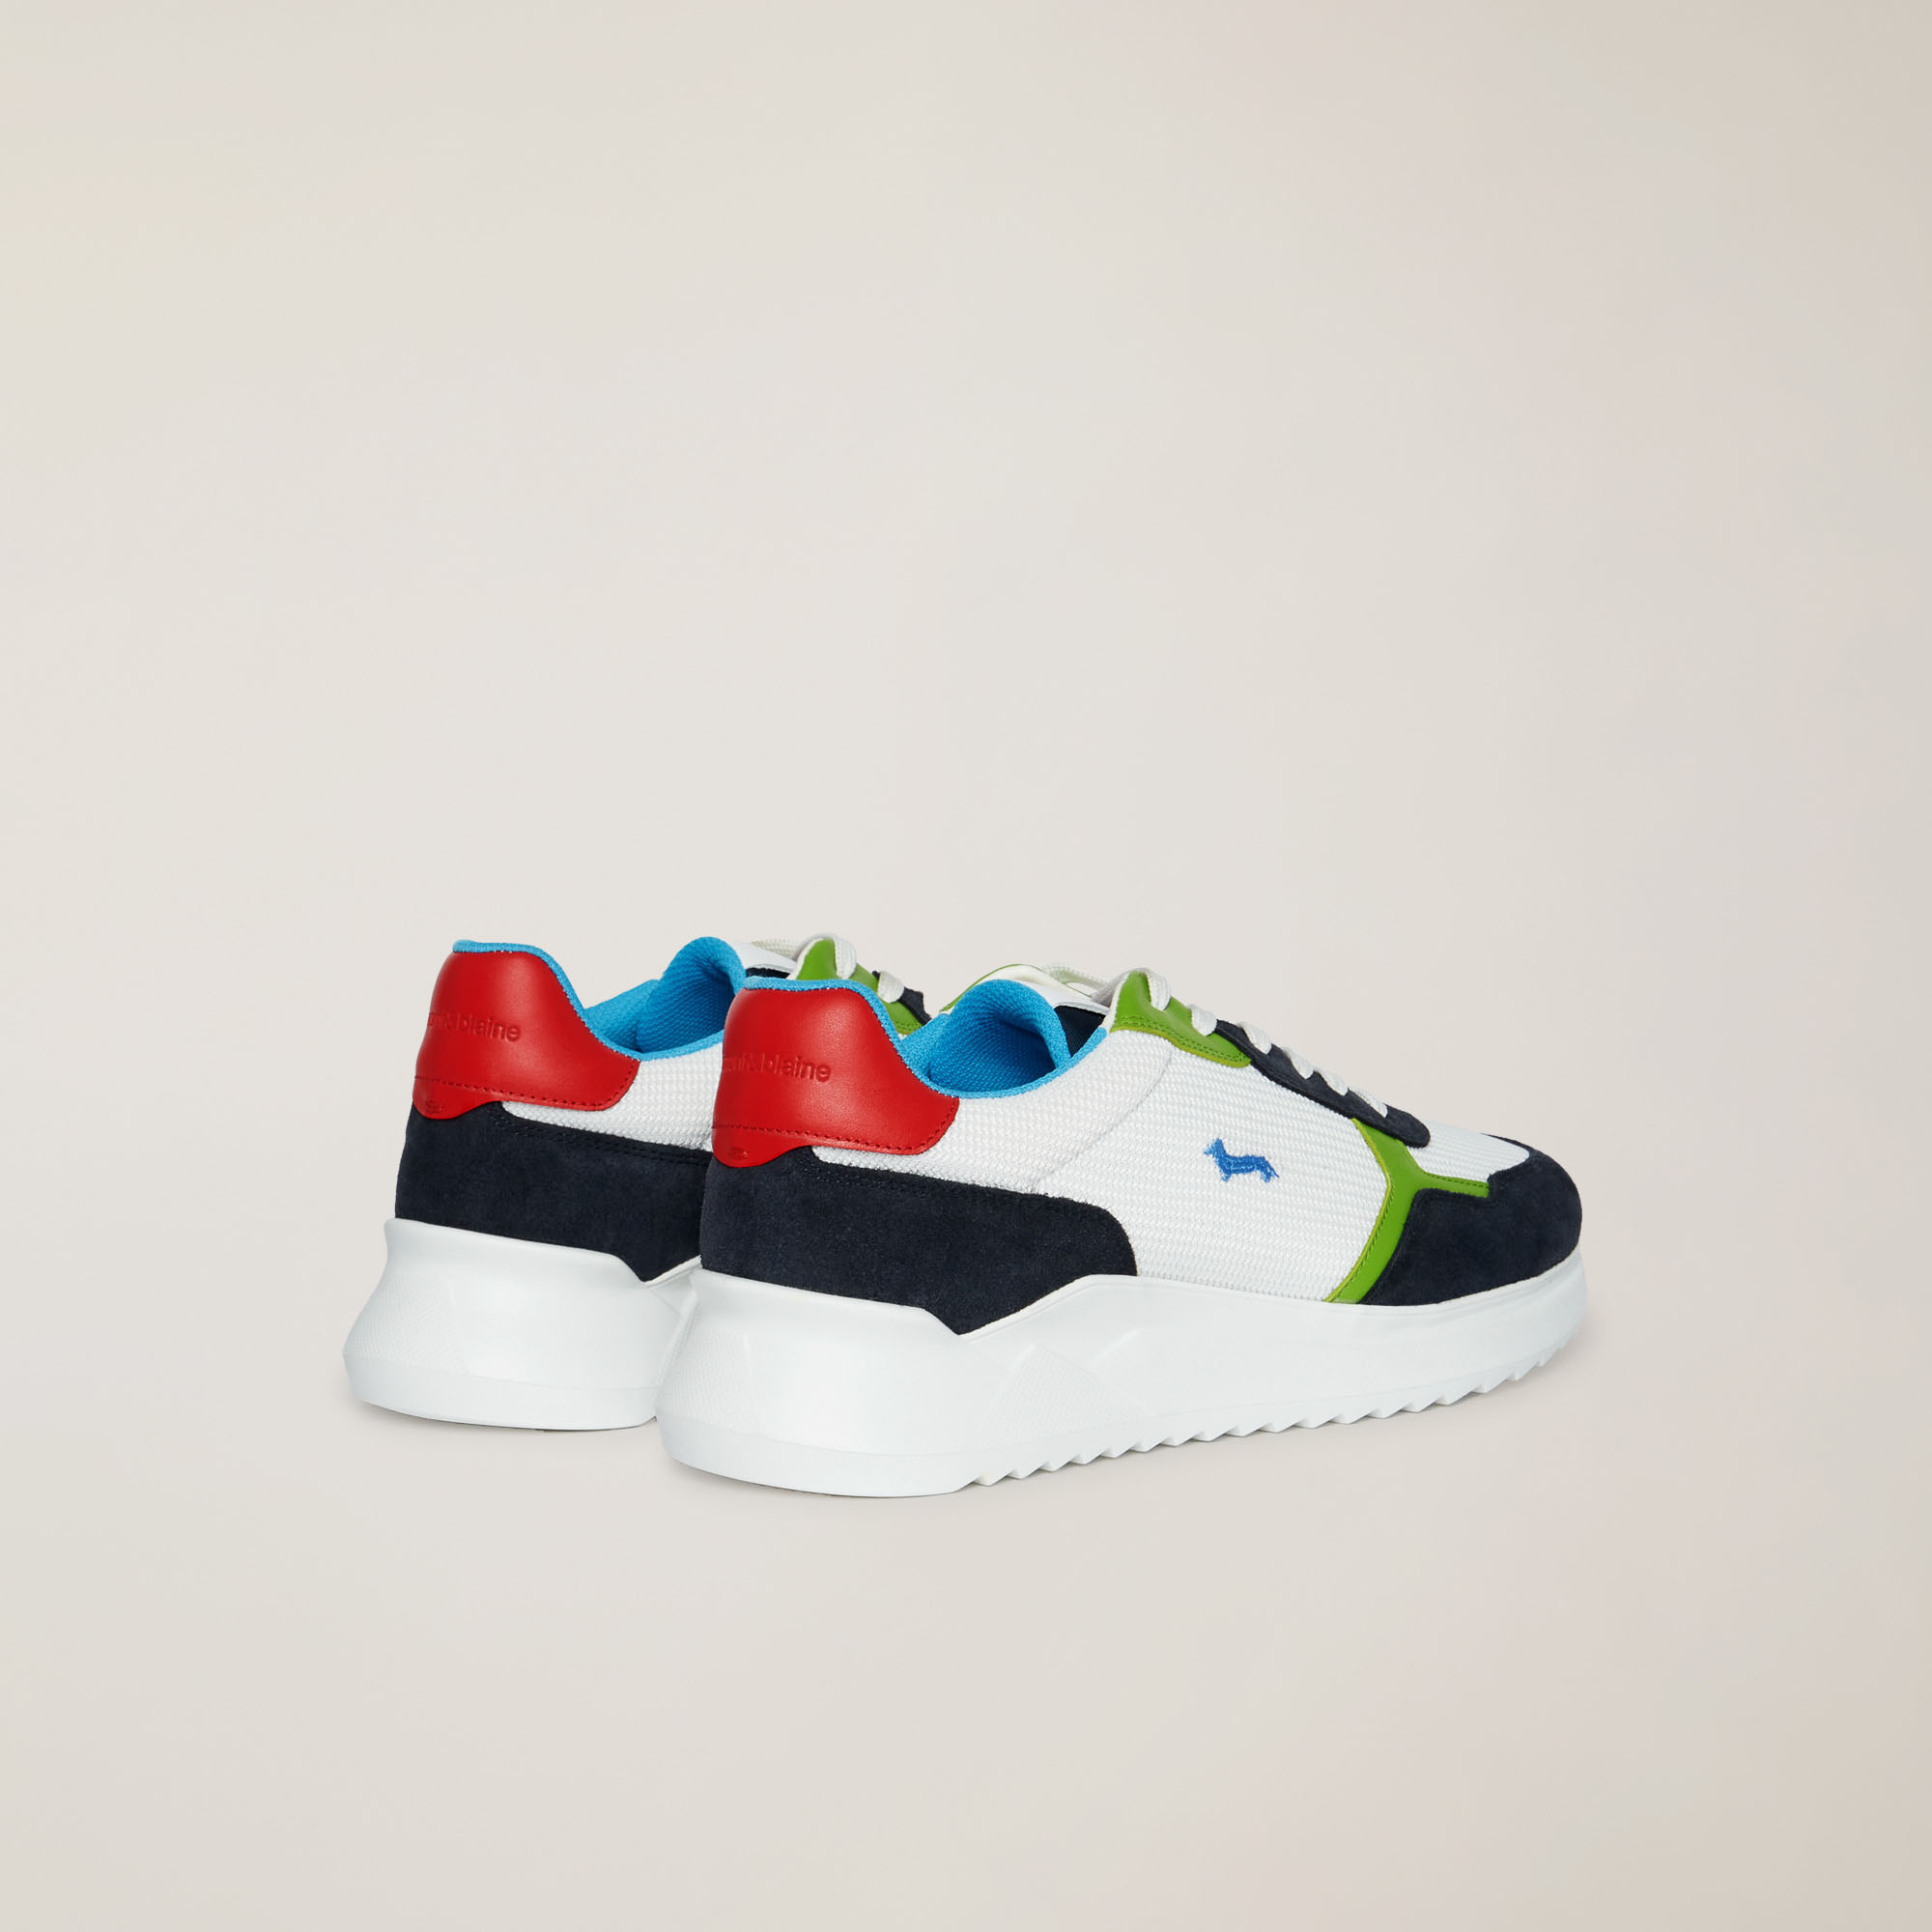 Mixed-Material Sneaker, Blue/White/Red, large image number 2